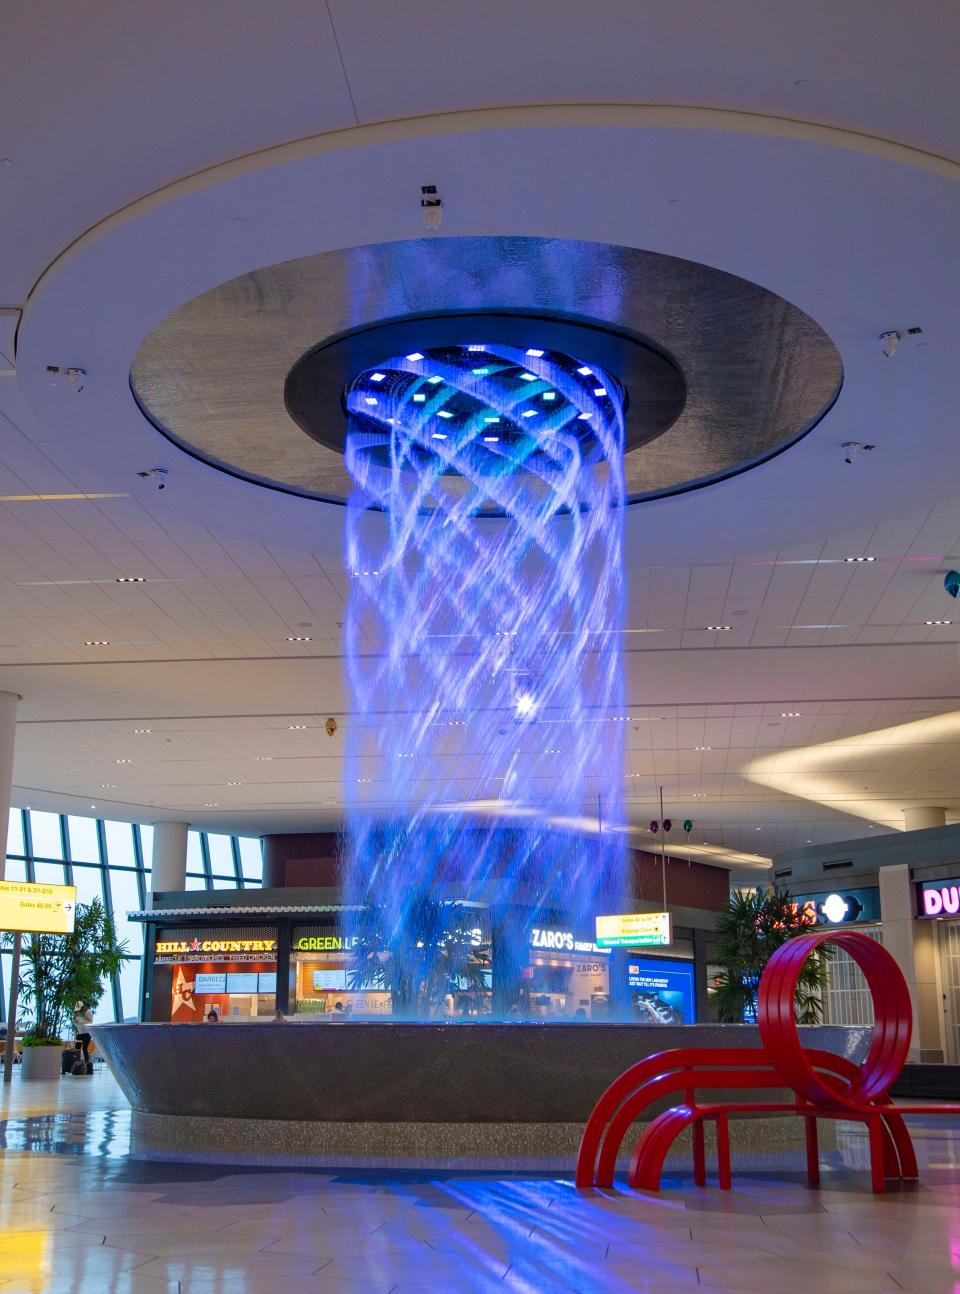 The water feature in LaGuardia Terminal B puts on shows set to lights and music.